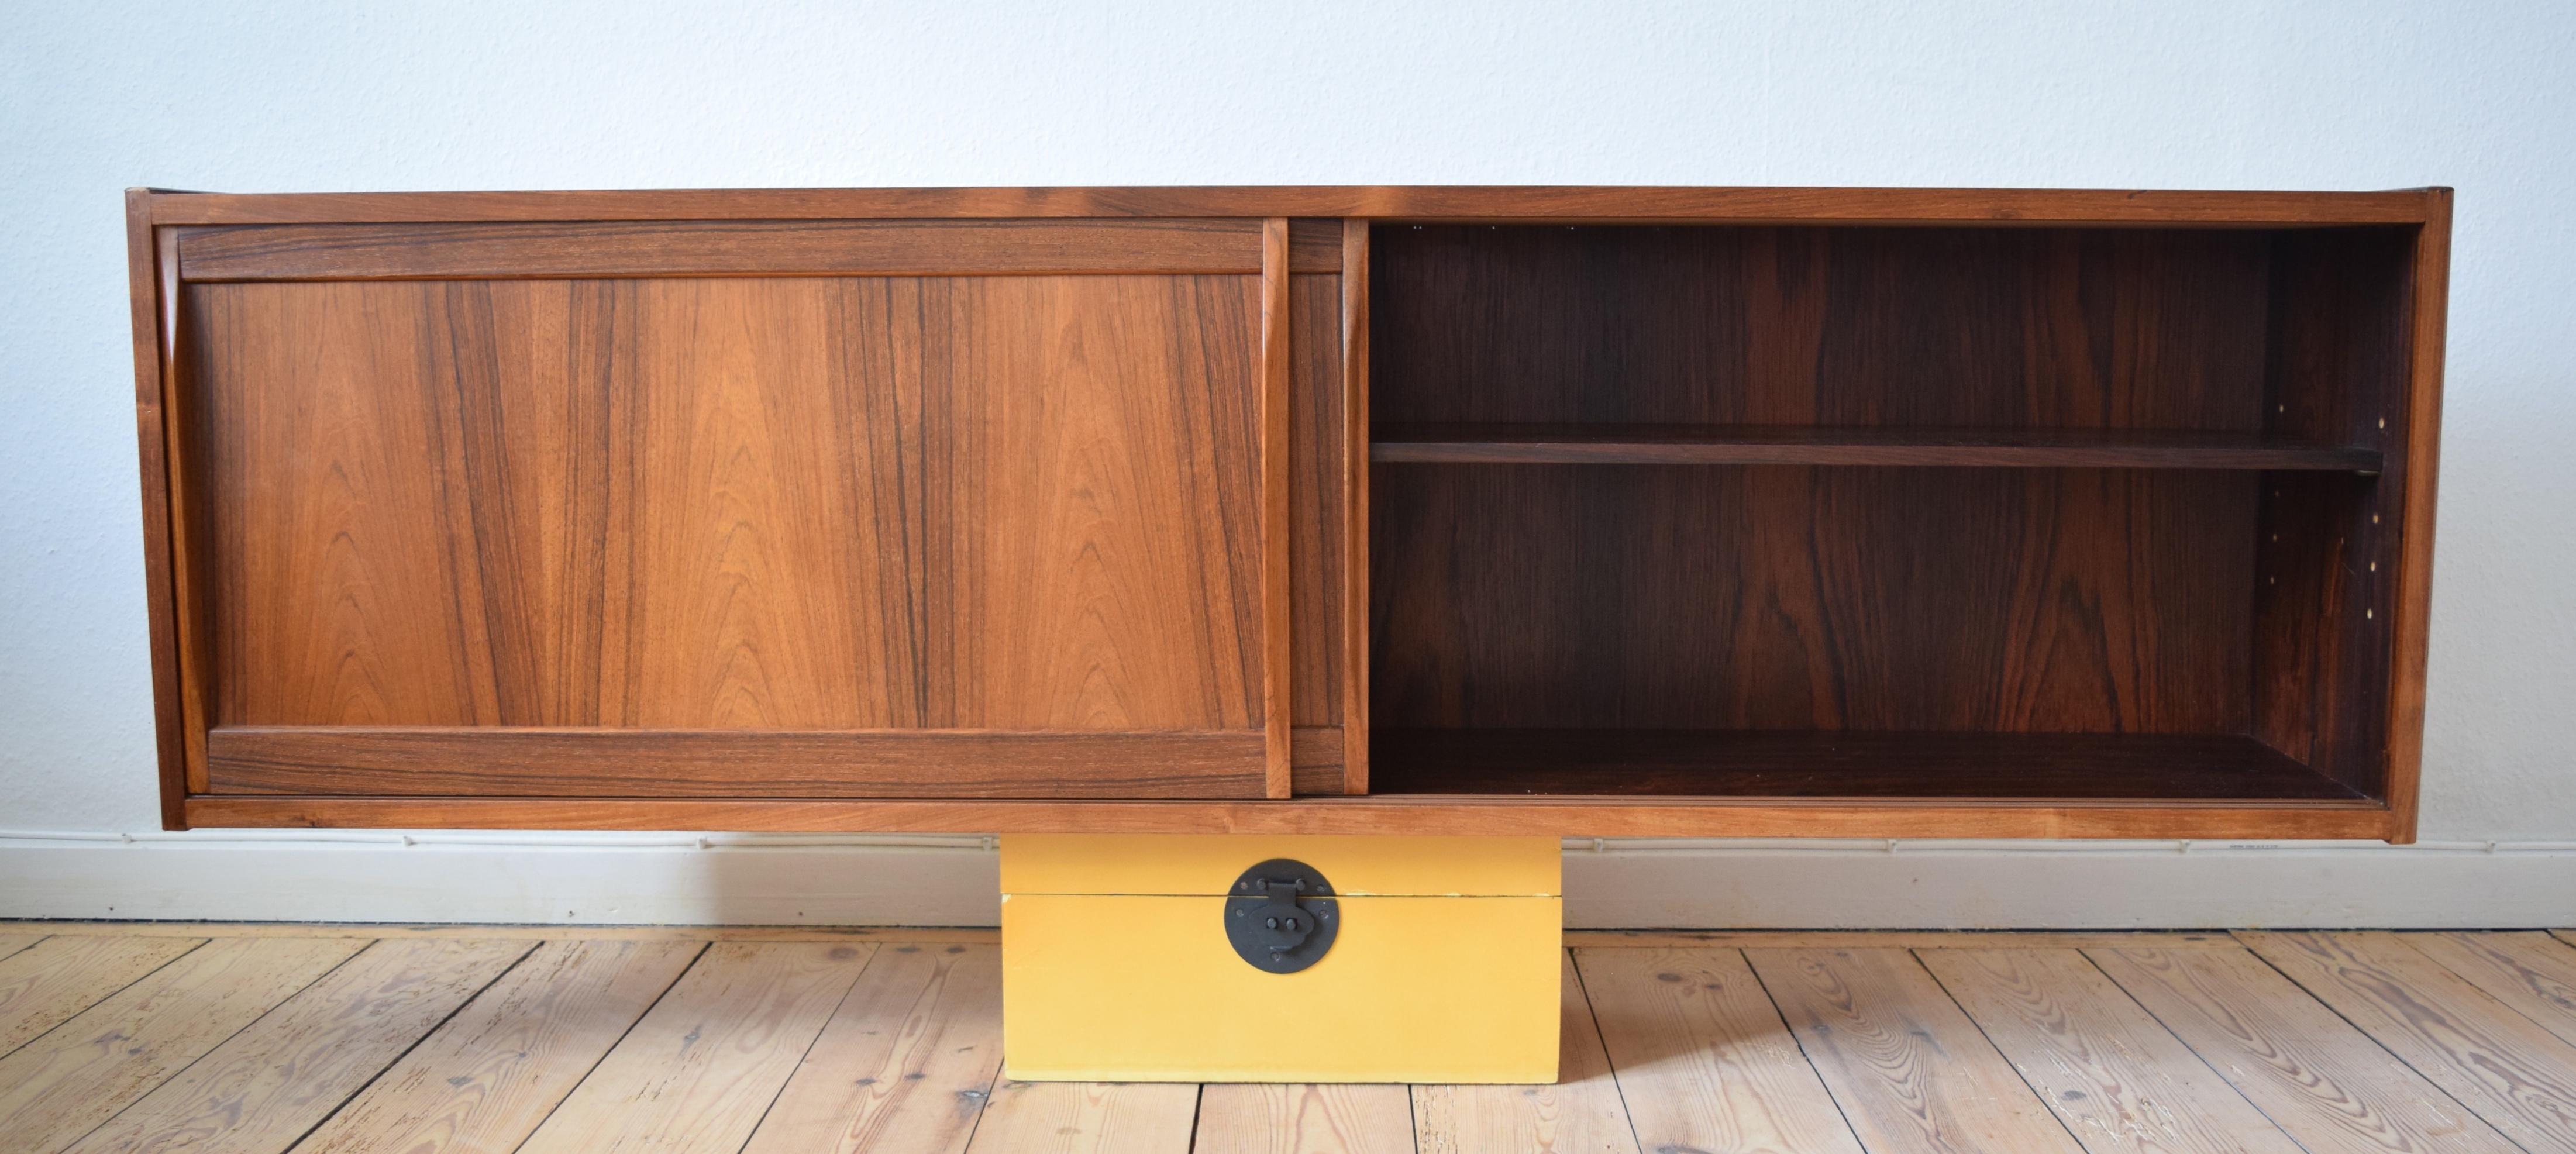 Rosewood wall-mounted sideboard manufactured in Denmark by Klim Møbelfabrik and designed by Erling Torvits in the 1960s. Features two smooth sliding doors with solid rosewood handles, Adjustable interior shelves. Stunning wood grain inside and